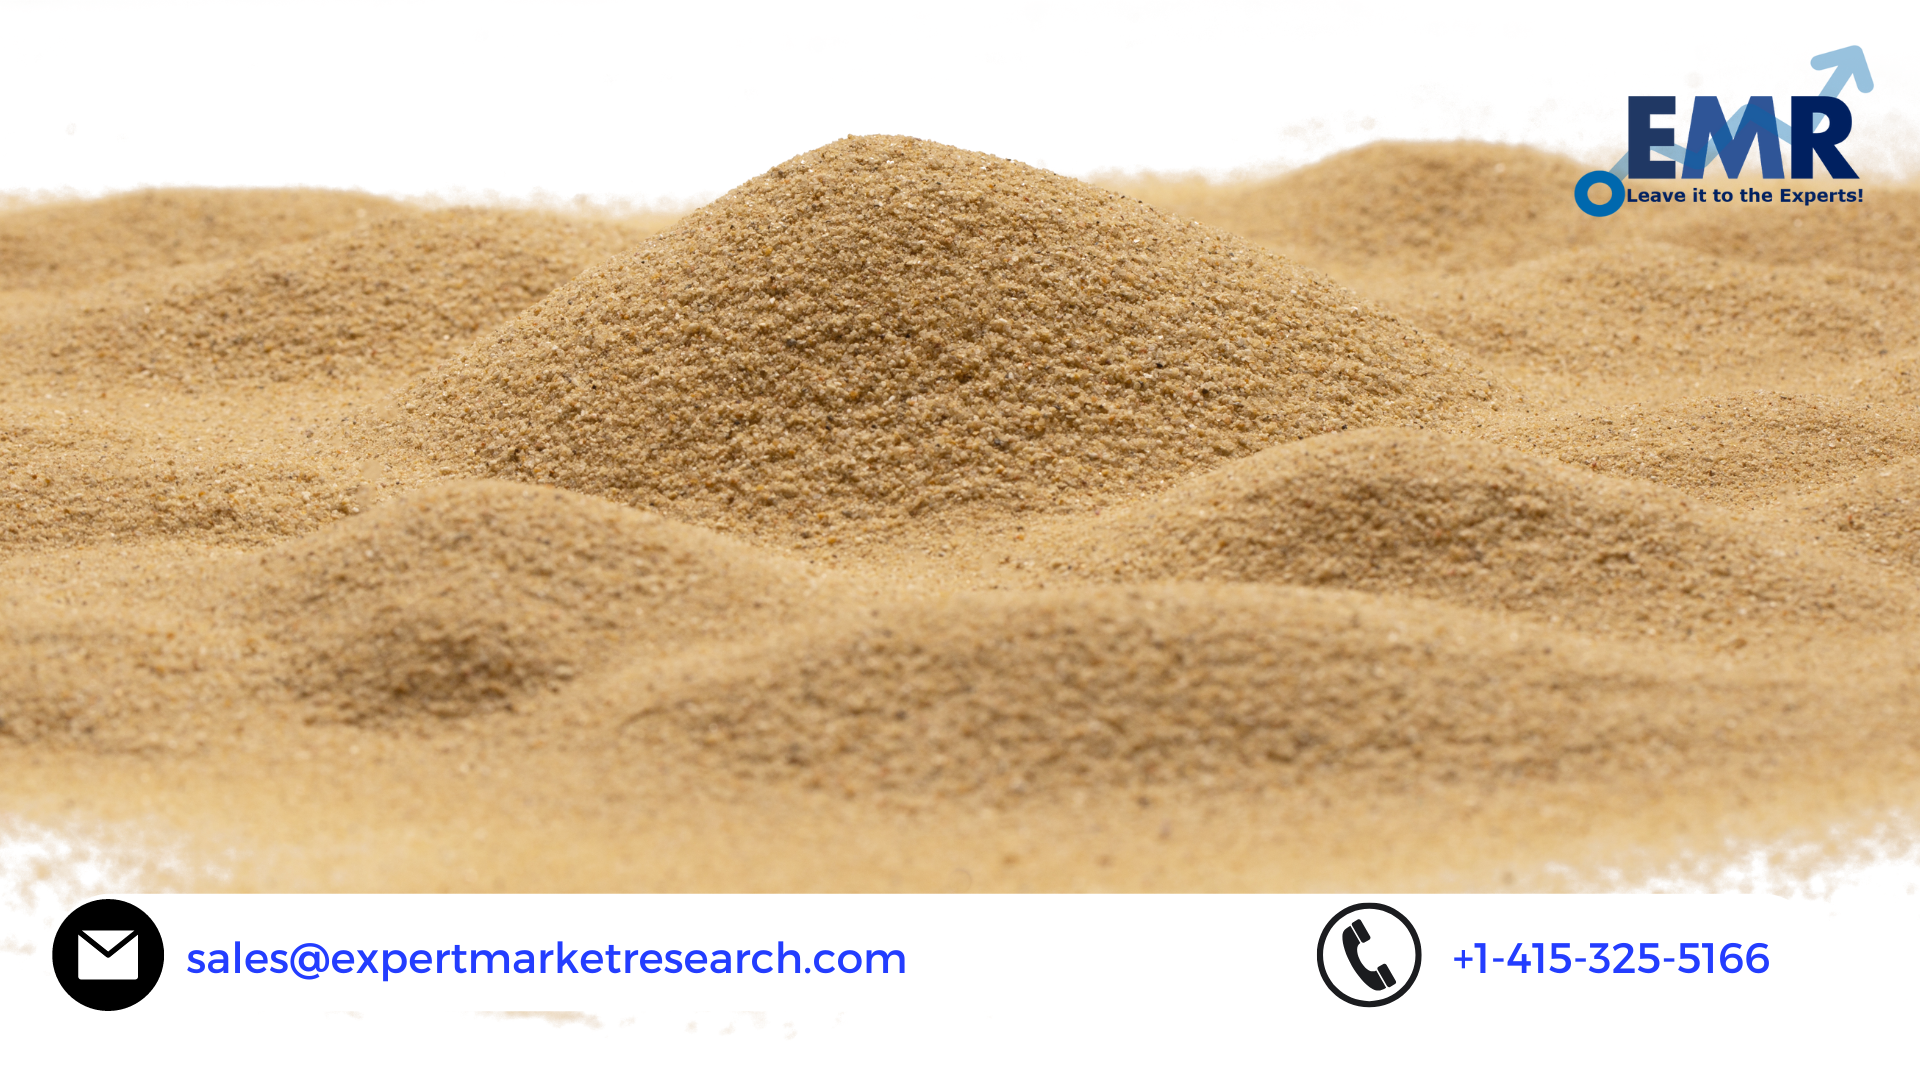 India Sand Market Size, Share, Report, Growth, Analysis, Price and Forecast Period 2021-2026